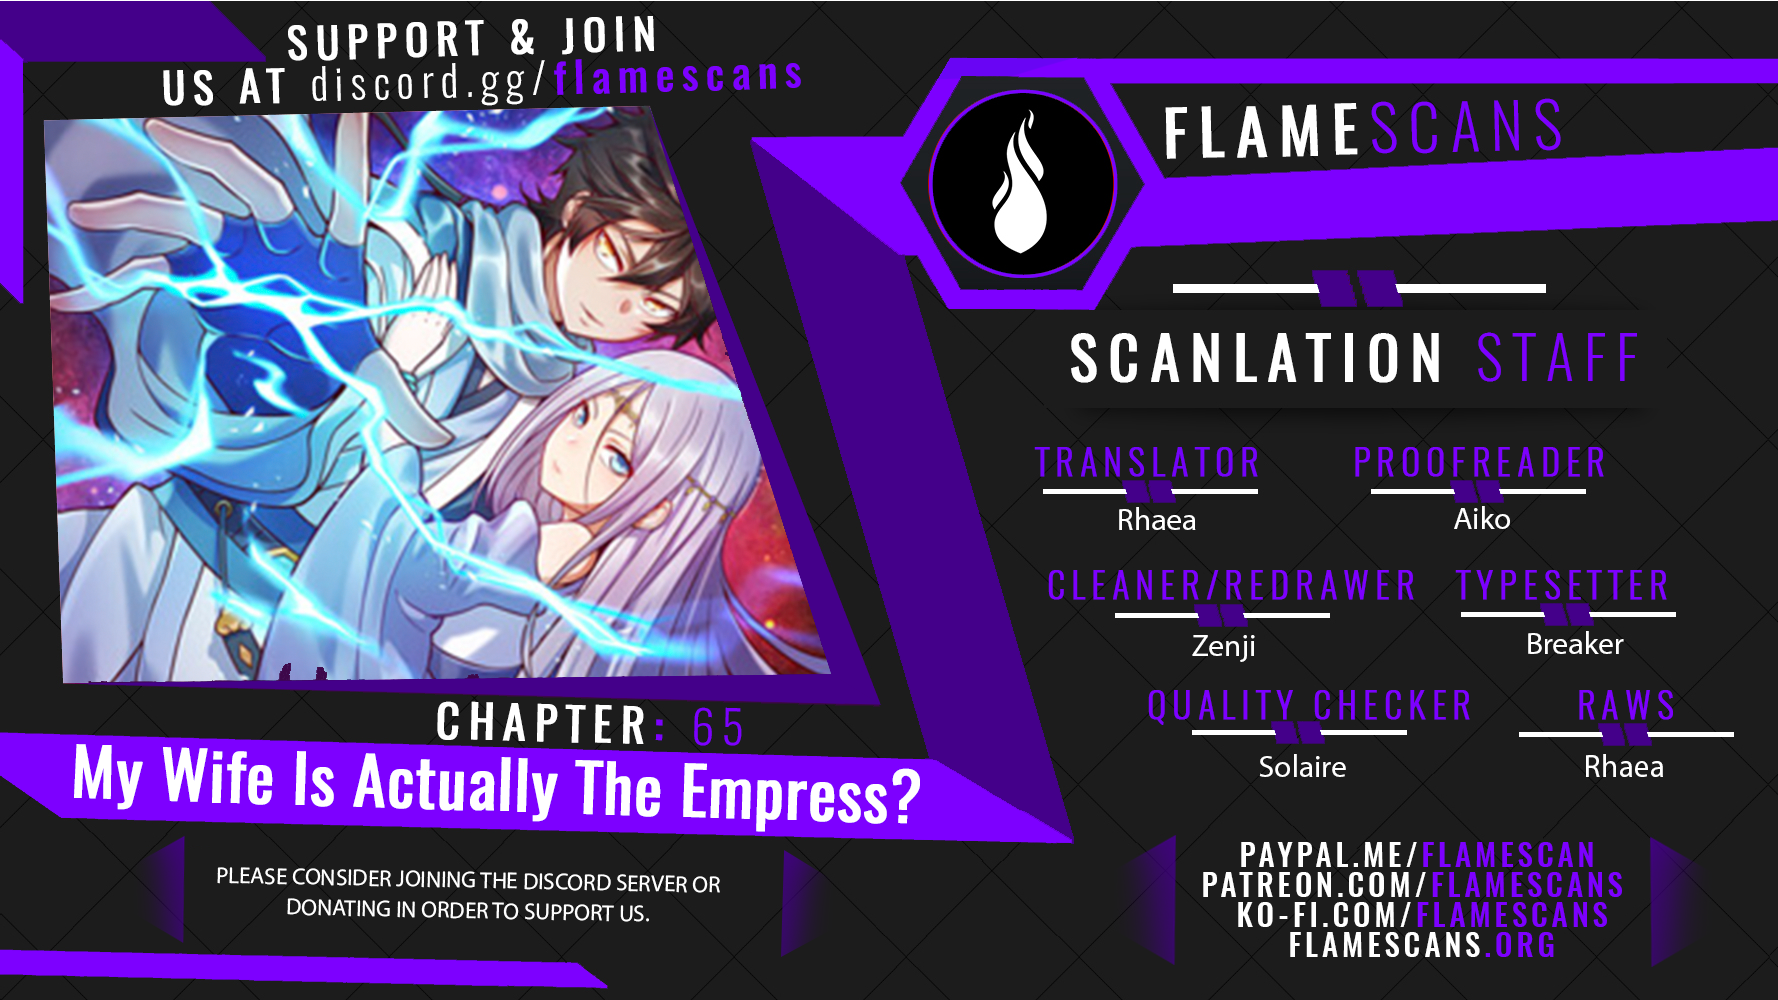 My Wife Is Actually The Empress? - Chapter 14175 - Image 1